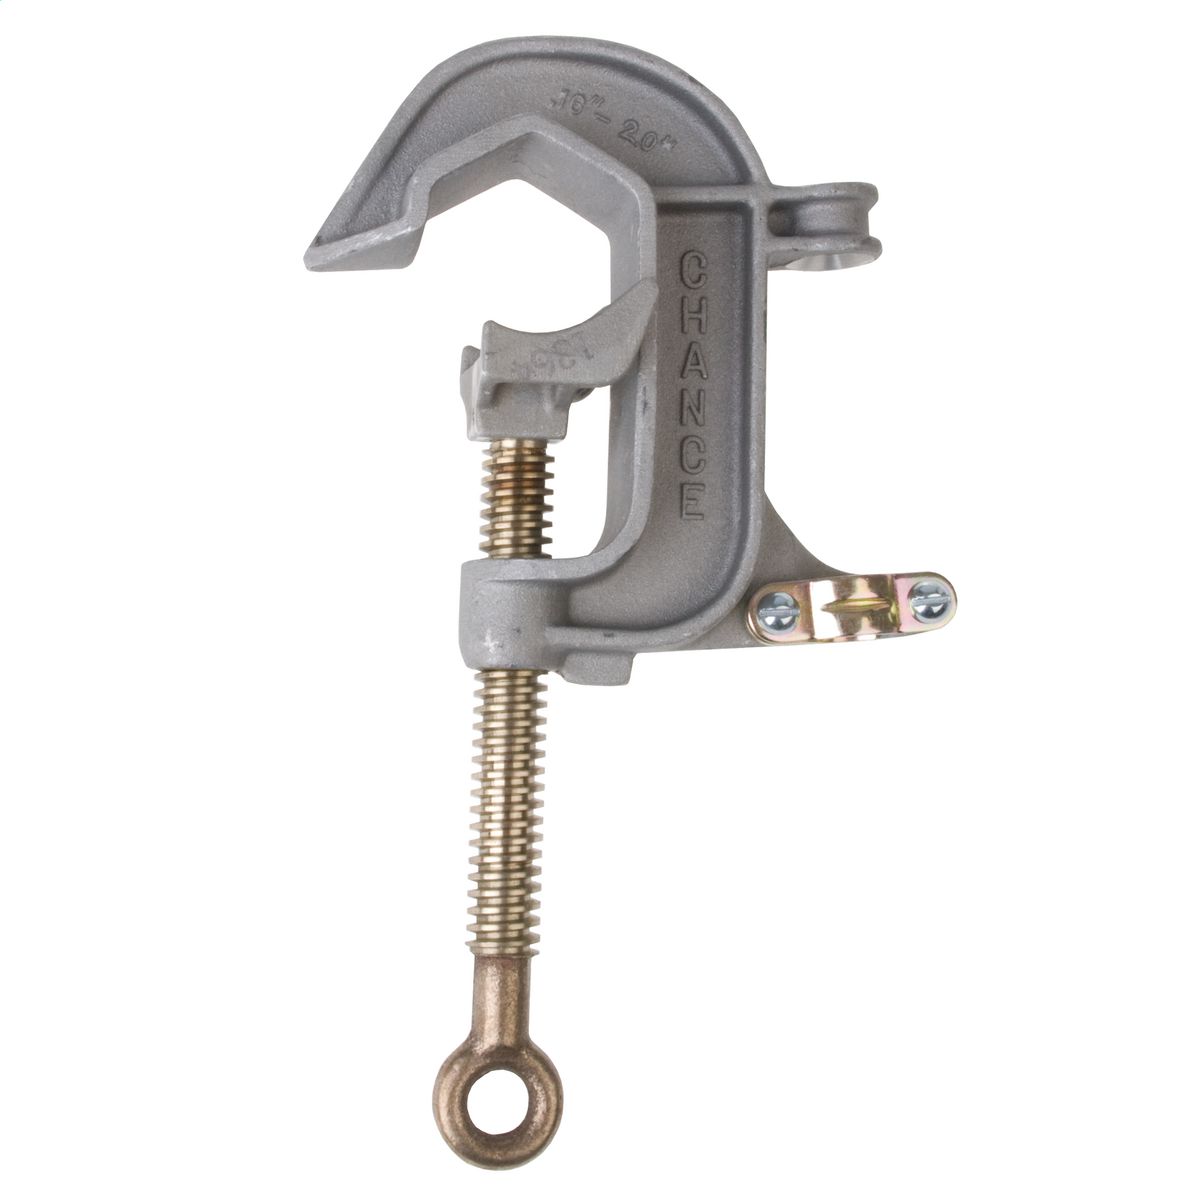 Ground Clamp - C-Type I-A-5 2" Jaw Opening | C6002255 | Hubbell Power